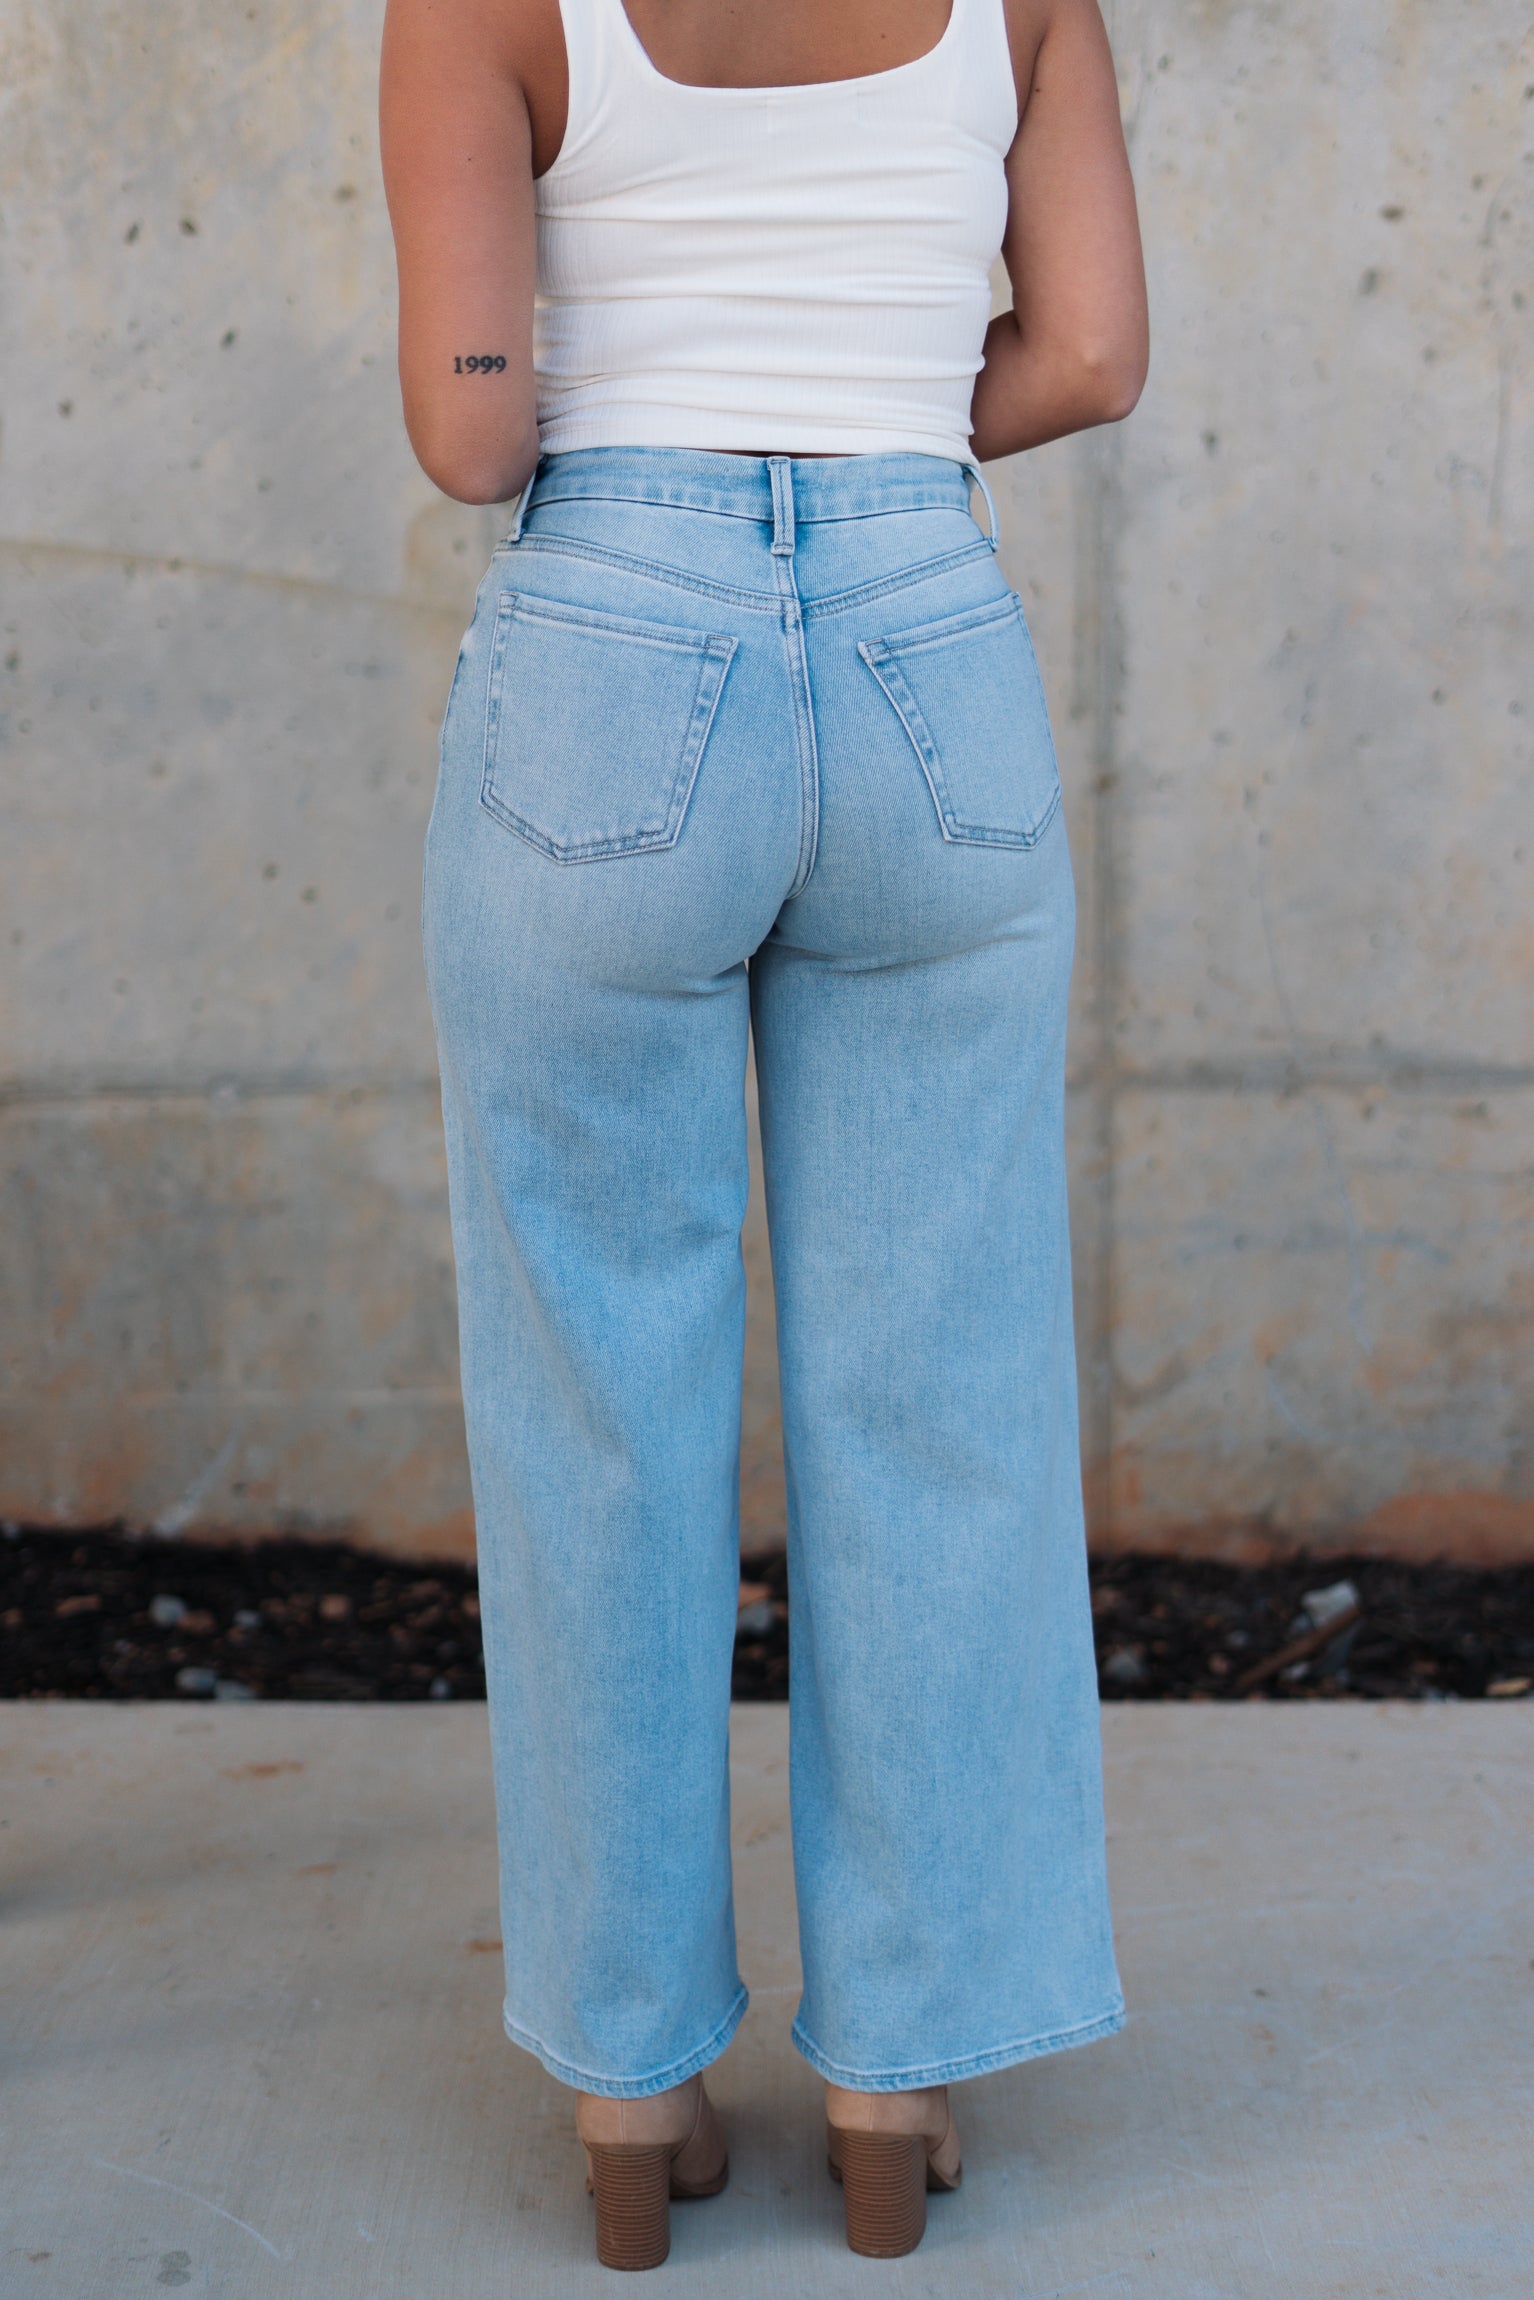 Back view of female model wearing the Kristen Light Wash Wide Leg Jeans that features wide cropped legs, light wash denim, belt loops, pockets, and a zipper/button fly. Worn with white tank top